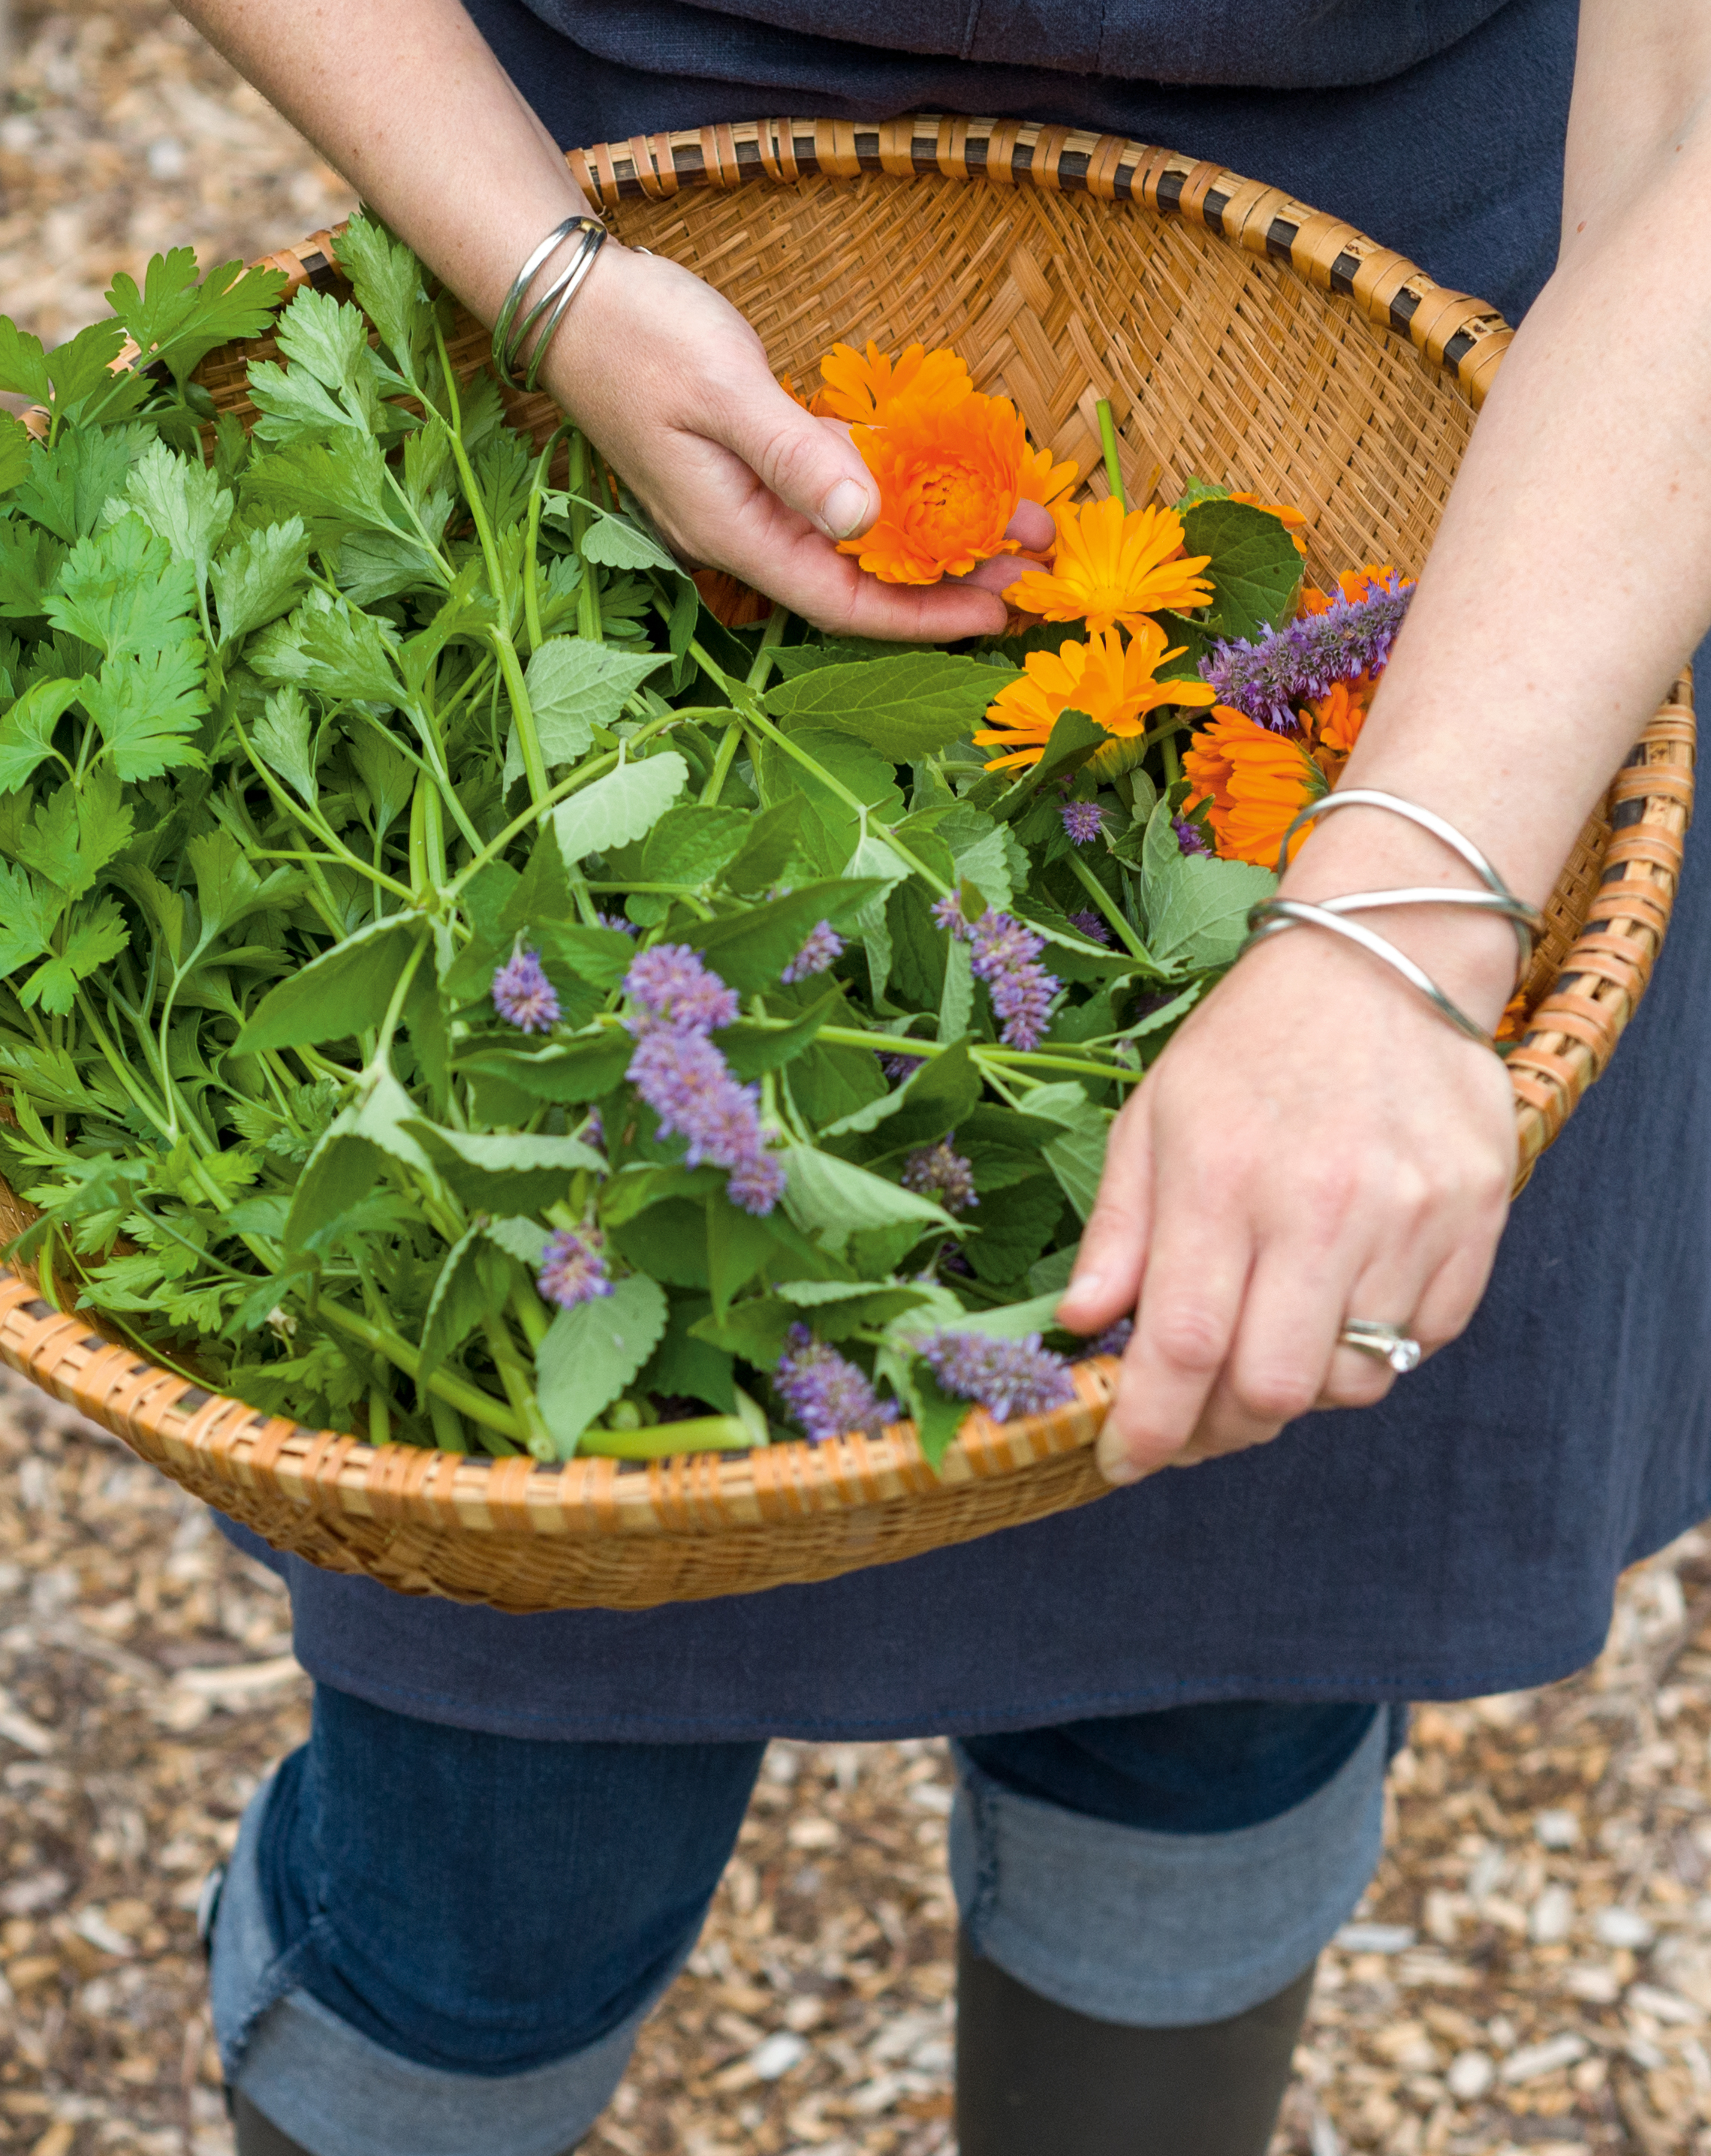 A basket of freshly picked herbs being held in someone's forearms.